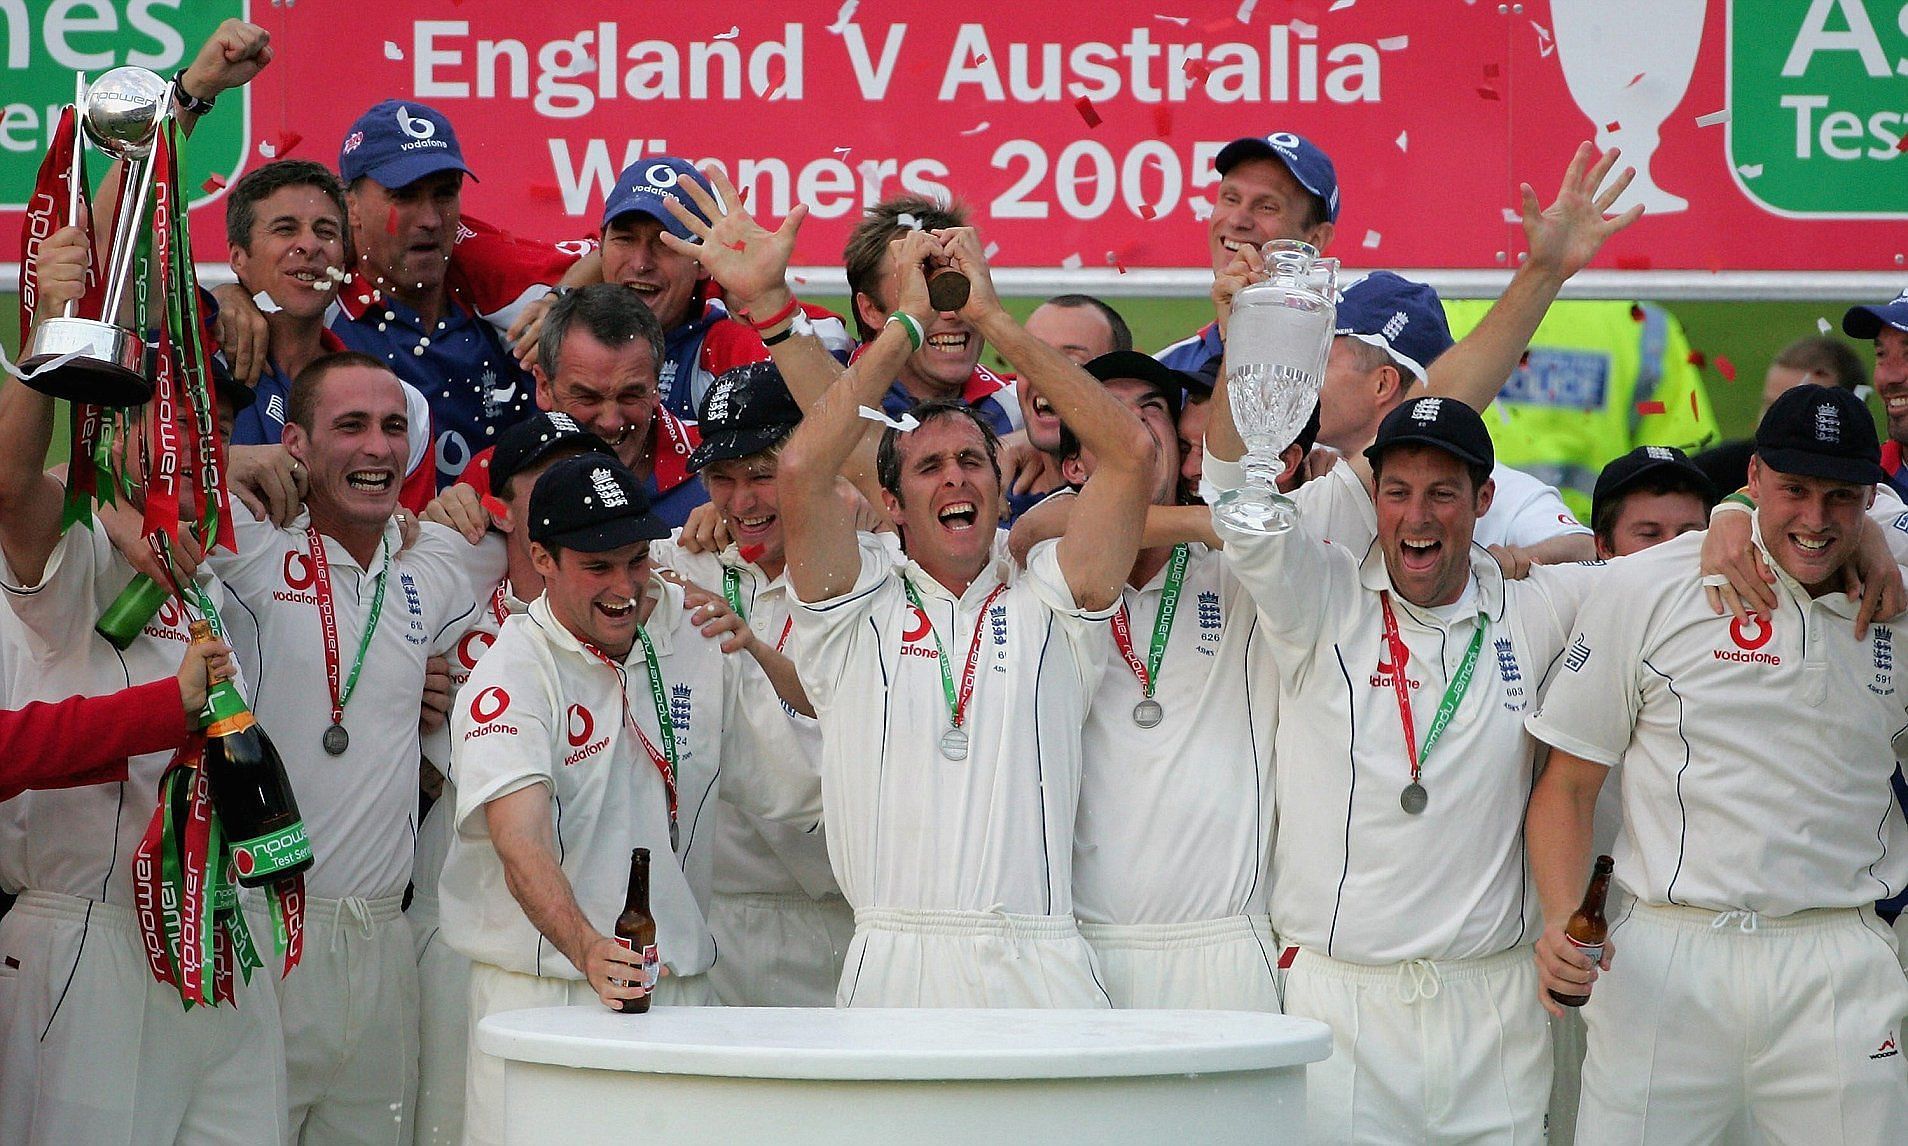 2005 Ashes-winning English side. (PC: Daily Mail)